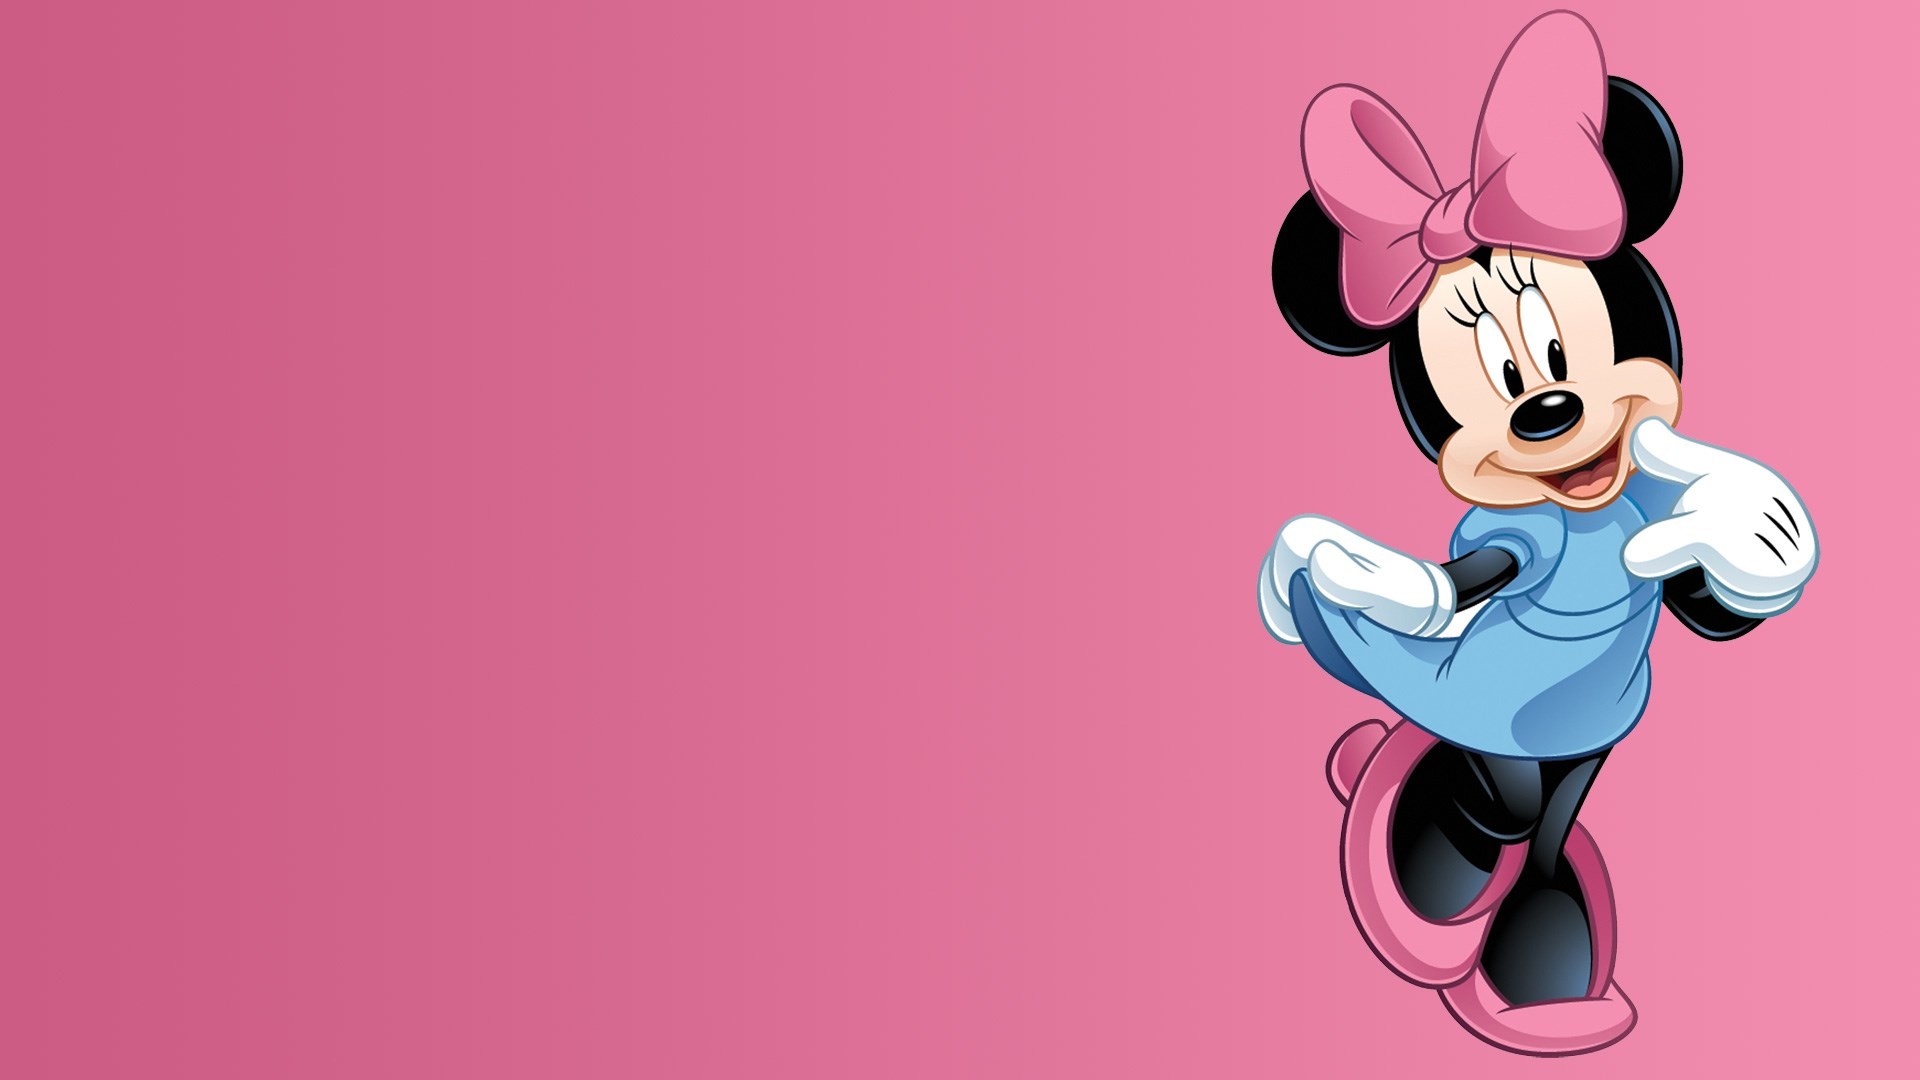 1920x1080 1920 x 1080px mickey mouse pictures for desktop by Wilfred Backer |  ololoshka | Pinterest | Mickey mouse pictures